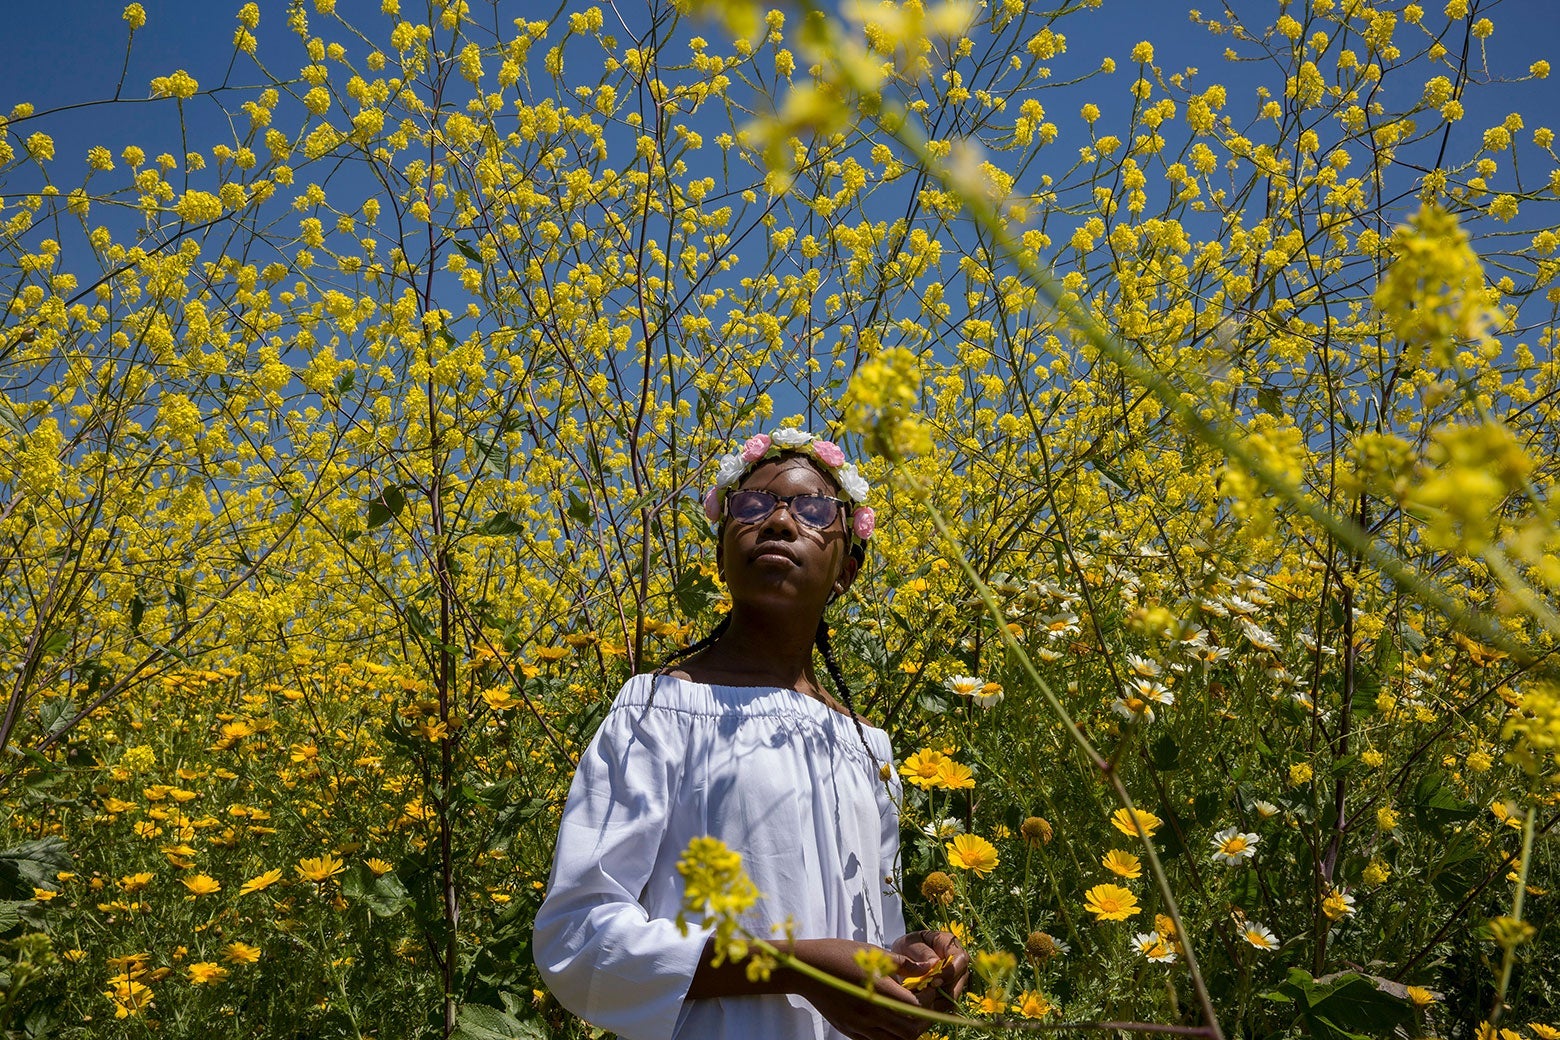 A Black girl stands surrounded by wildflowers in a still from the movie.